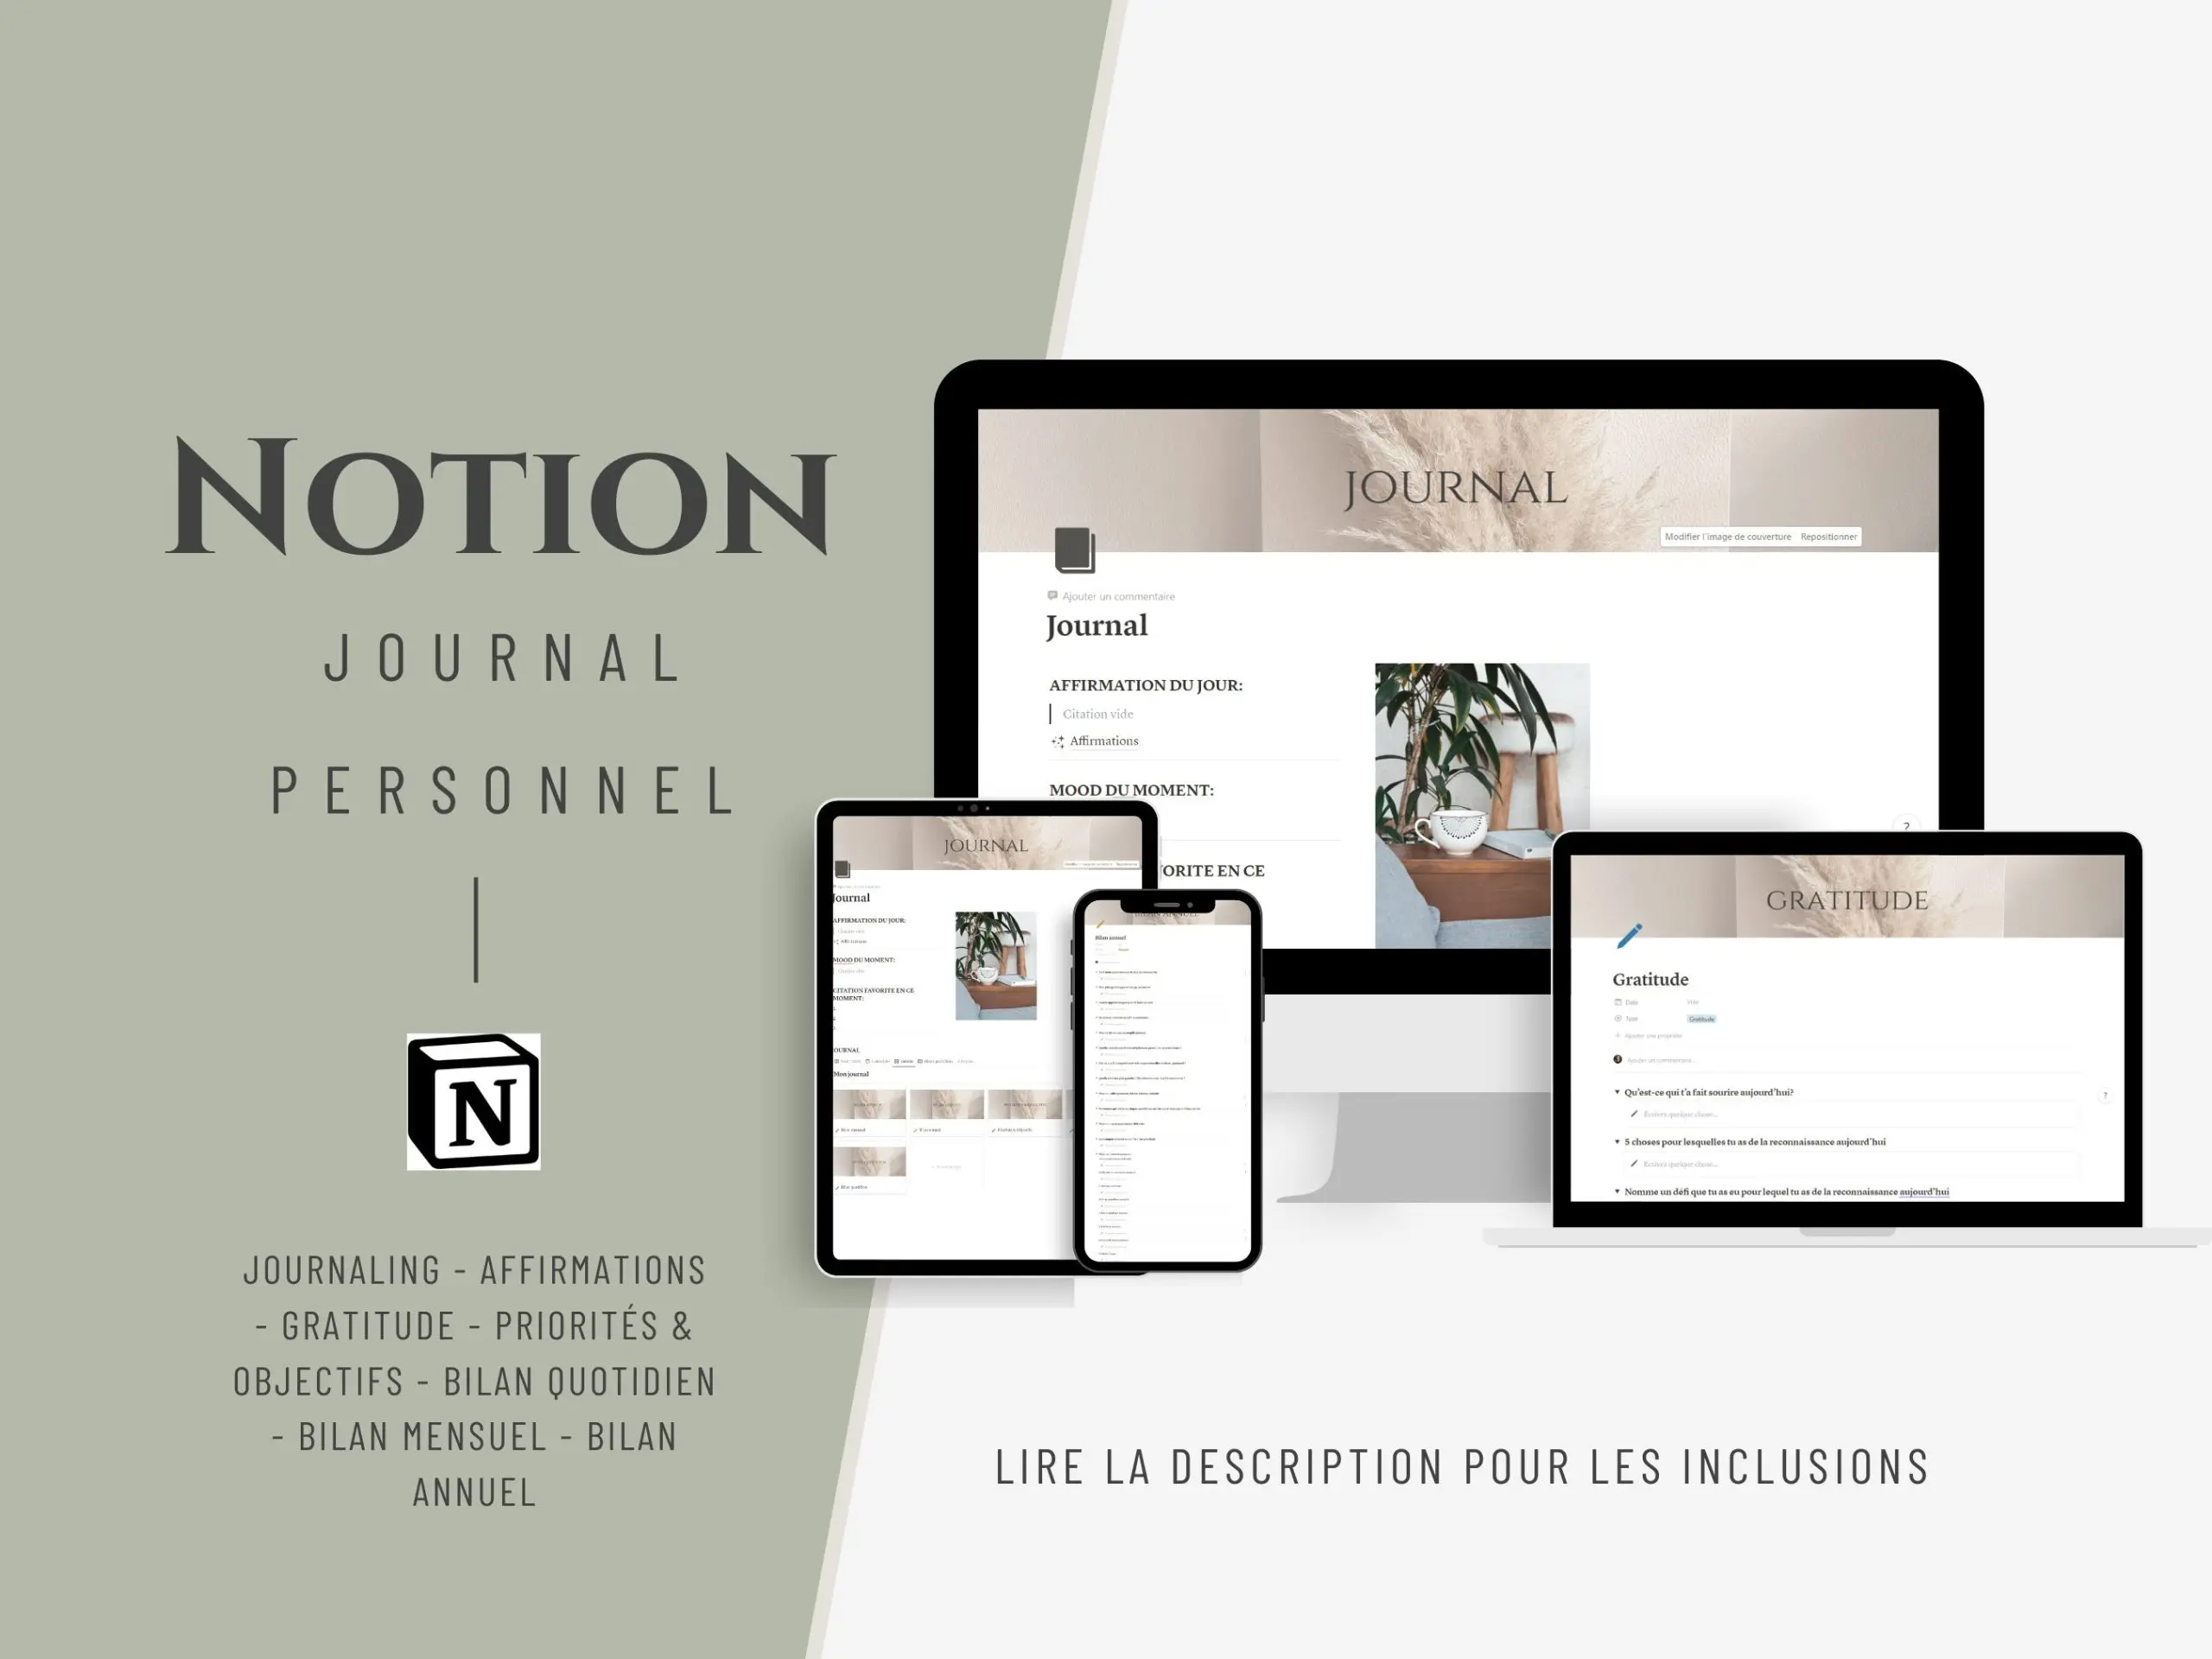 template-notion-journal-personnel